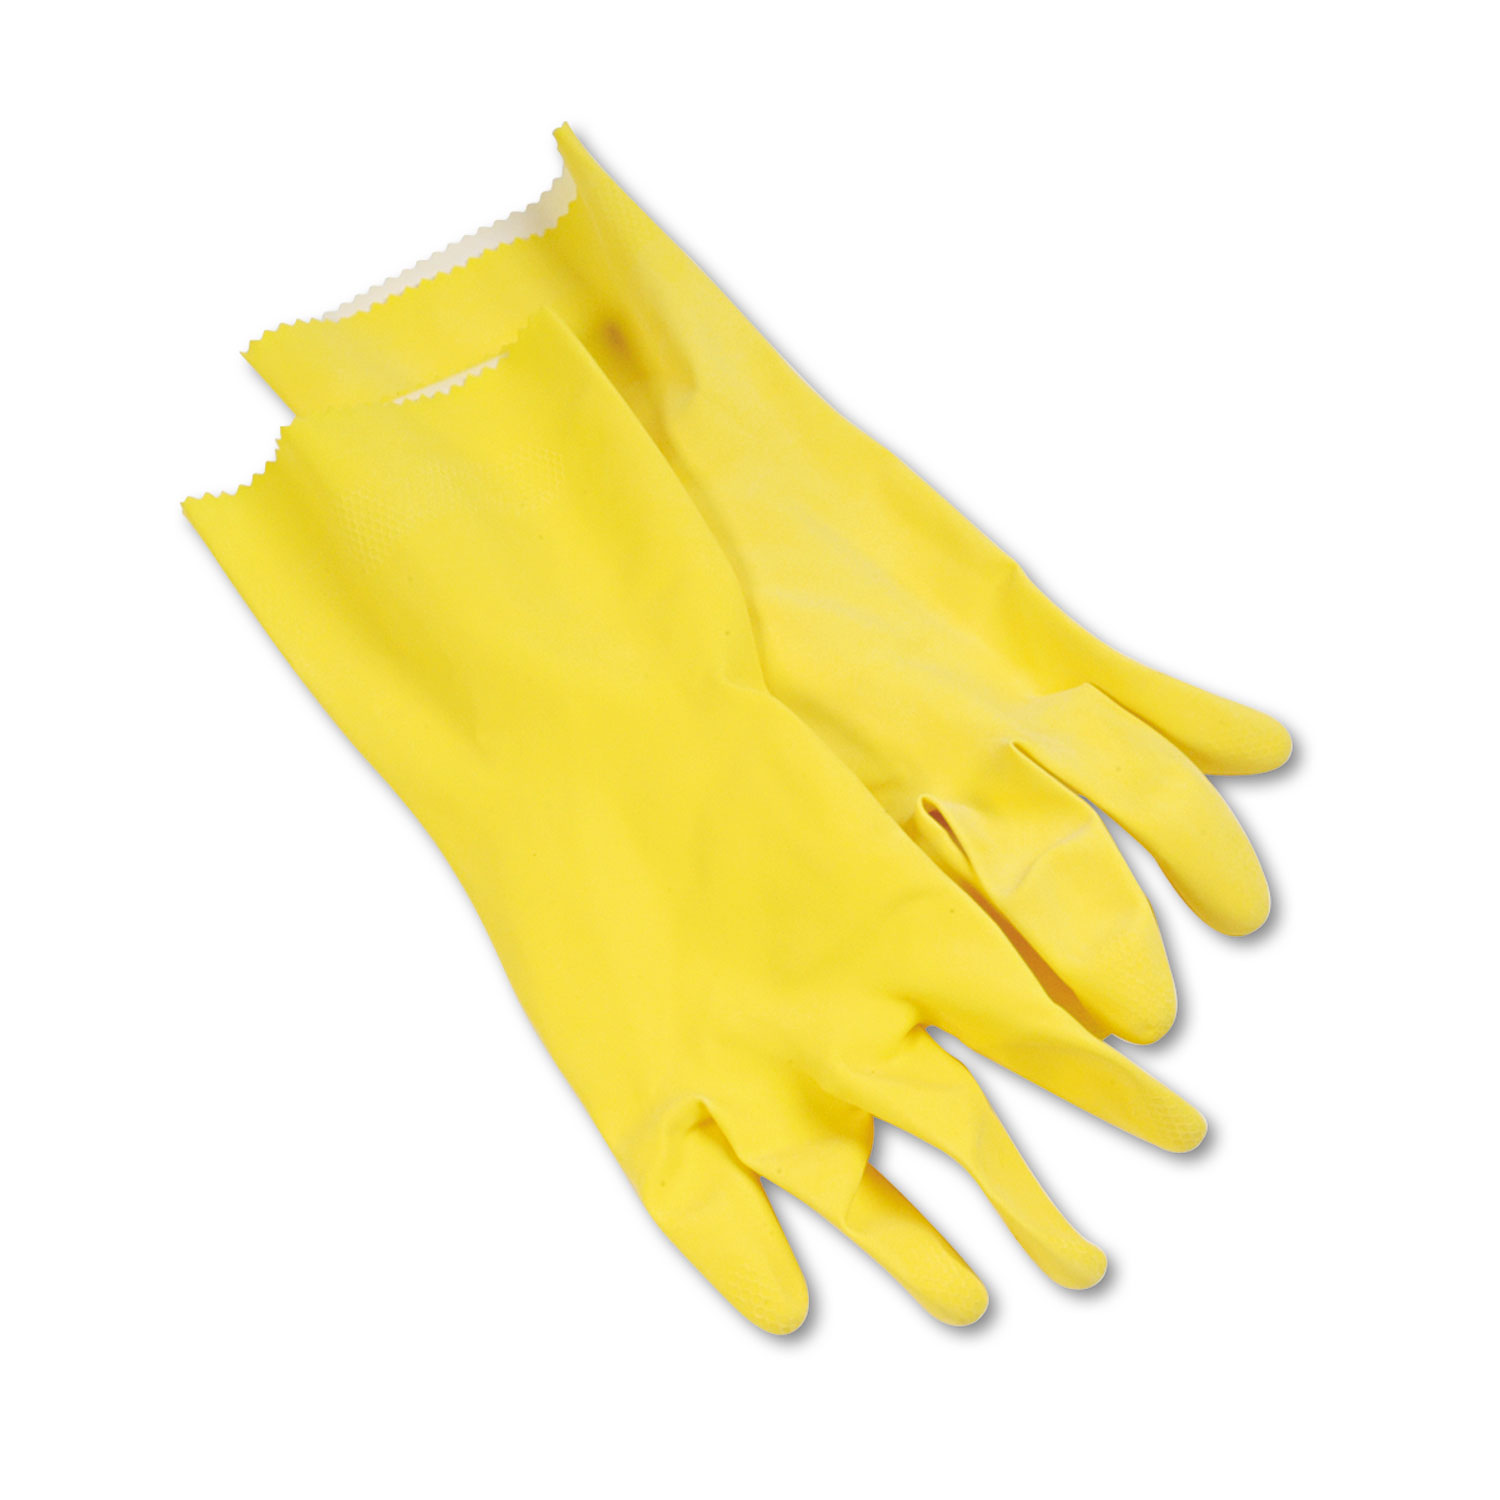  Boardwalk BWK242L Flock-Lined Latex Cleaning Gloves, Large, Yellow, 12 Pairs (BWK242L) 